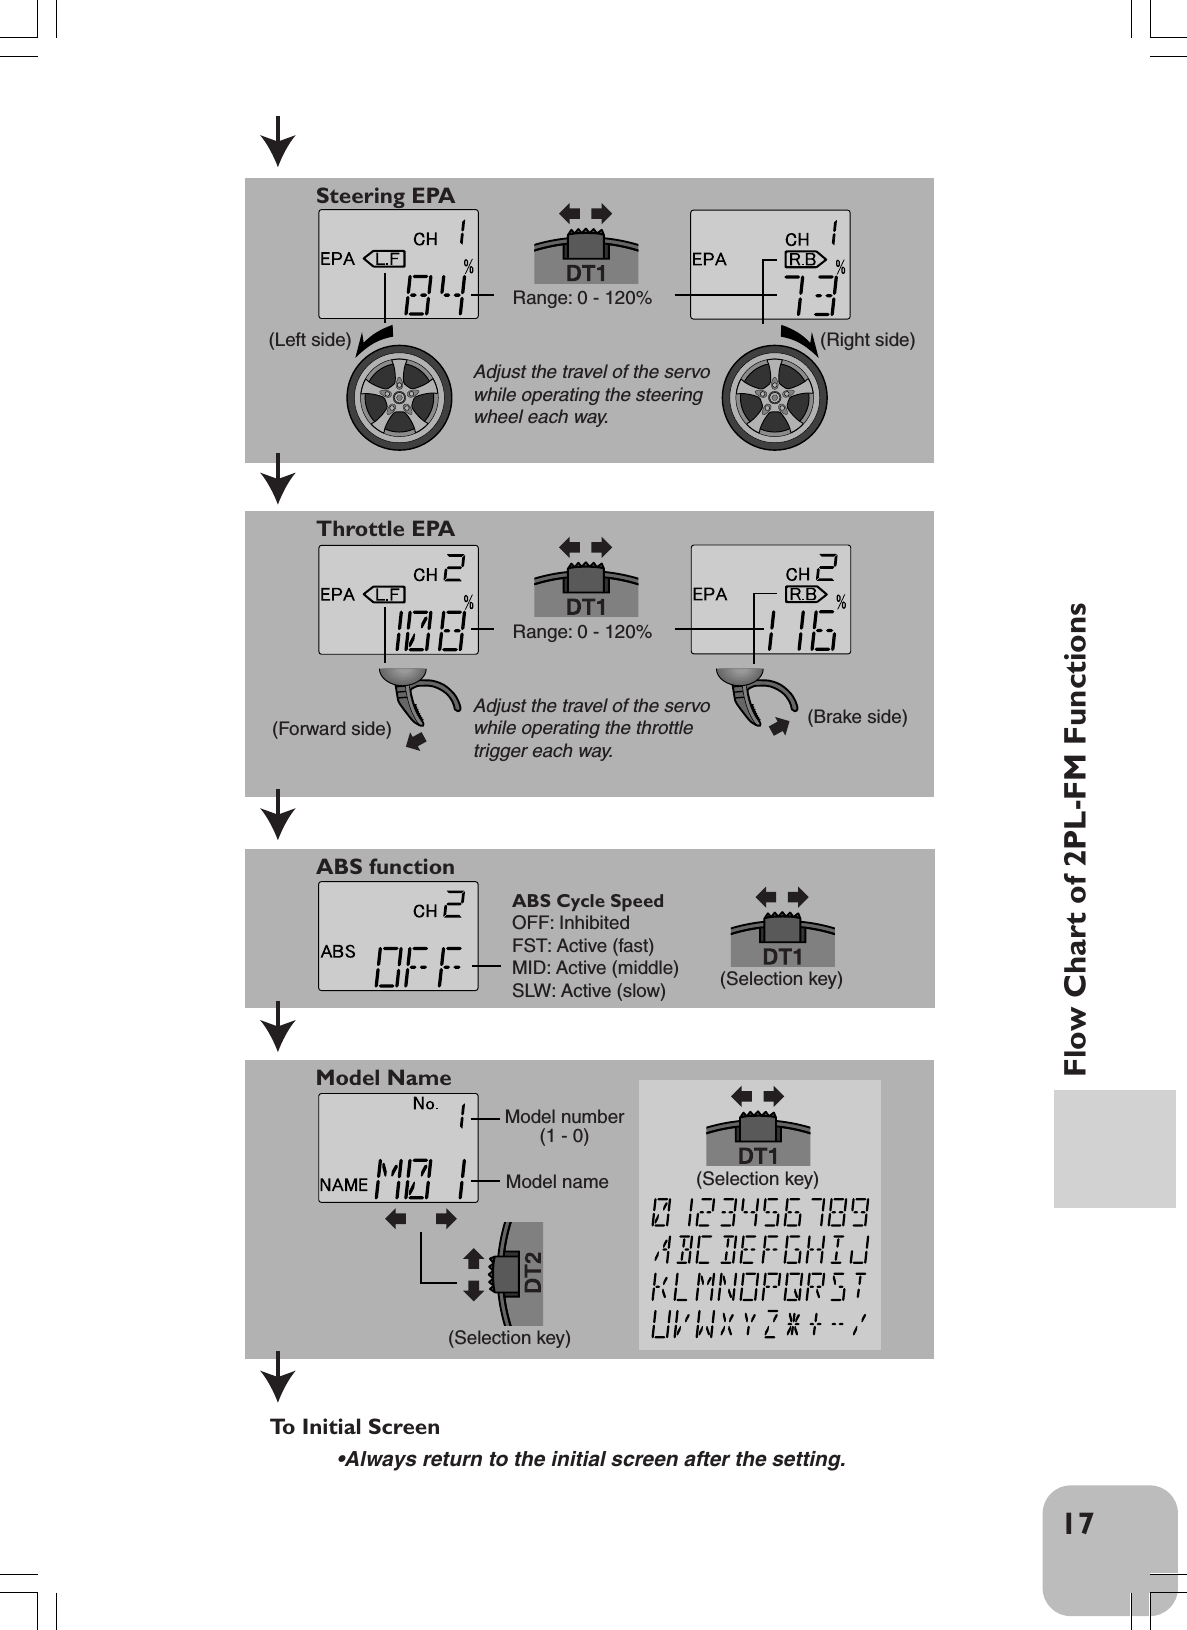 17Flow Chart of 2PL-FM FunctionsSteering EPAAdjust the travel of the servowhile operating the steering wheel each way.Throttle EPAAdjust the travel of the servowhile operating the throttle trigger each way.To  Initial ScreenRange: 0 - 120%(Left side) (Right side)Range: 0 - 120%(Forward side) (Brake side)ABS Cycle SpeedOFF: InhibitedFST: Active (fast)MID: Active (middle)SLW: Active (slow) ABS functionModel Name(Selection key)(Selection key)(Selection key)Model number(1 - 0)Model name•Always return to the initial screen after the setting.